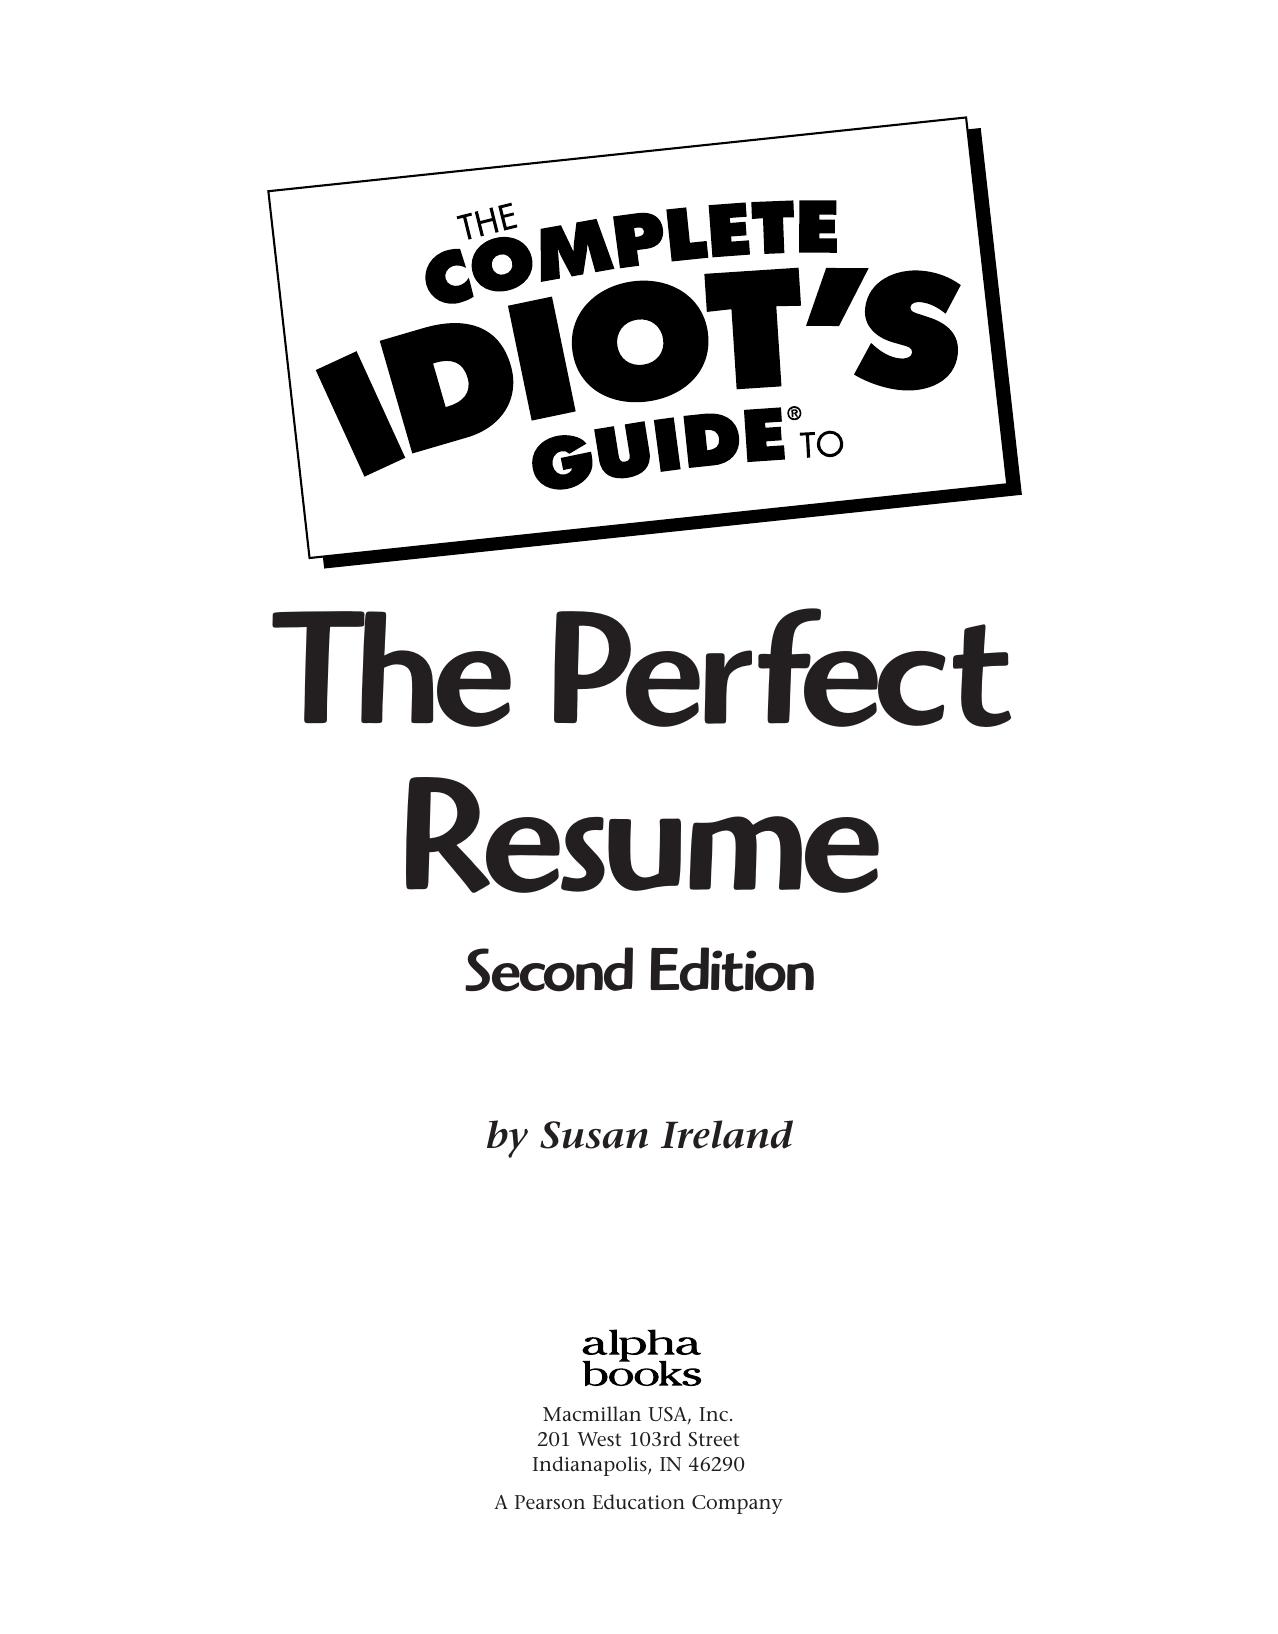 The Complete Idiot's Guide to the Perfect Resume by Susan Ireland